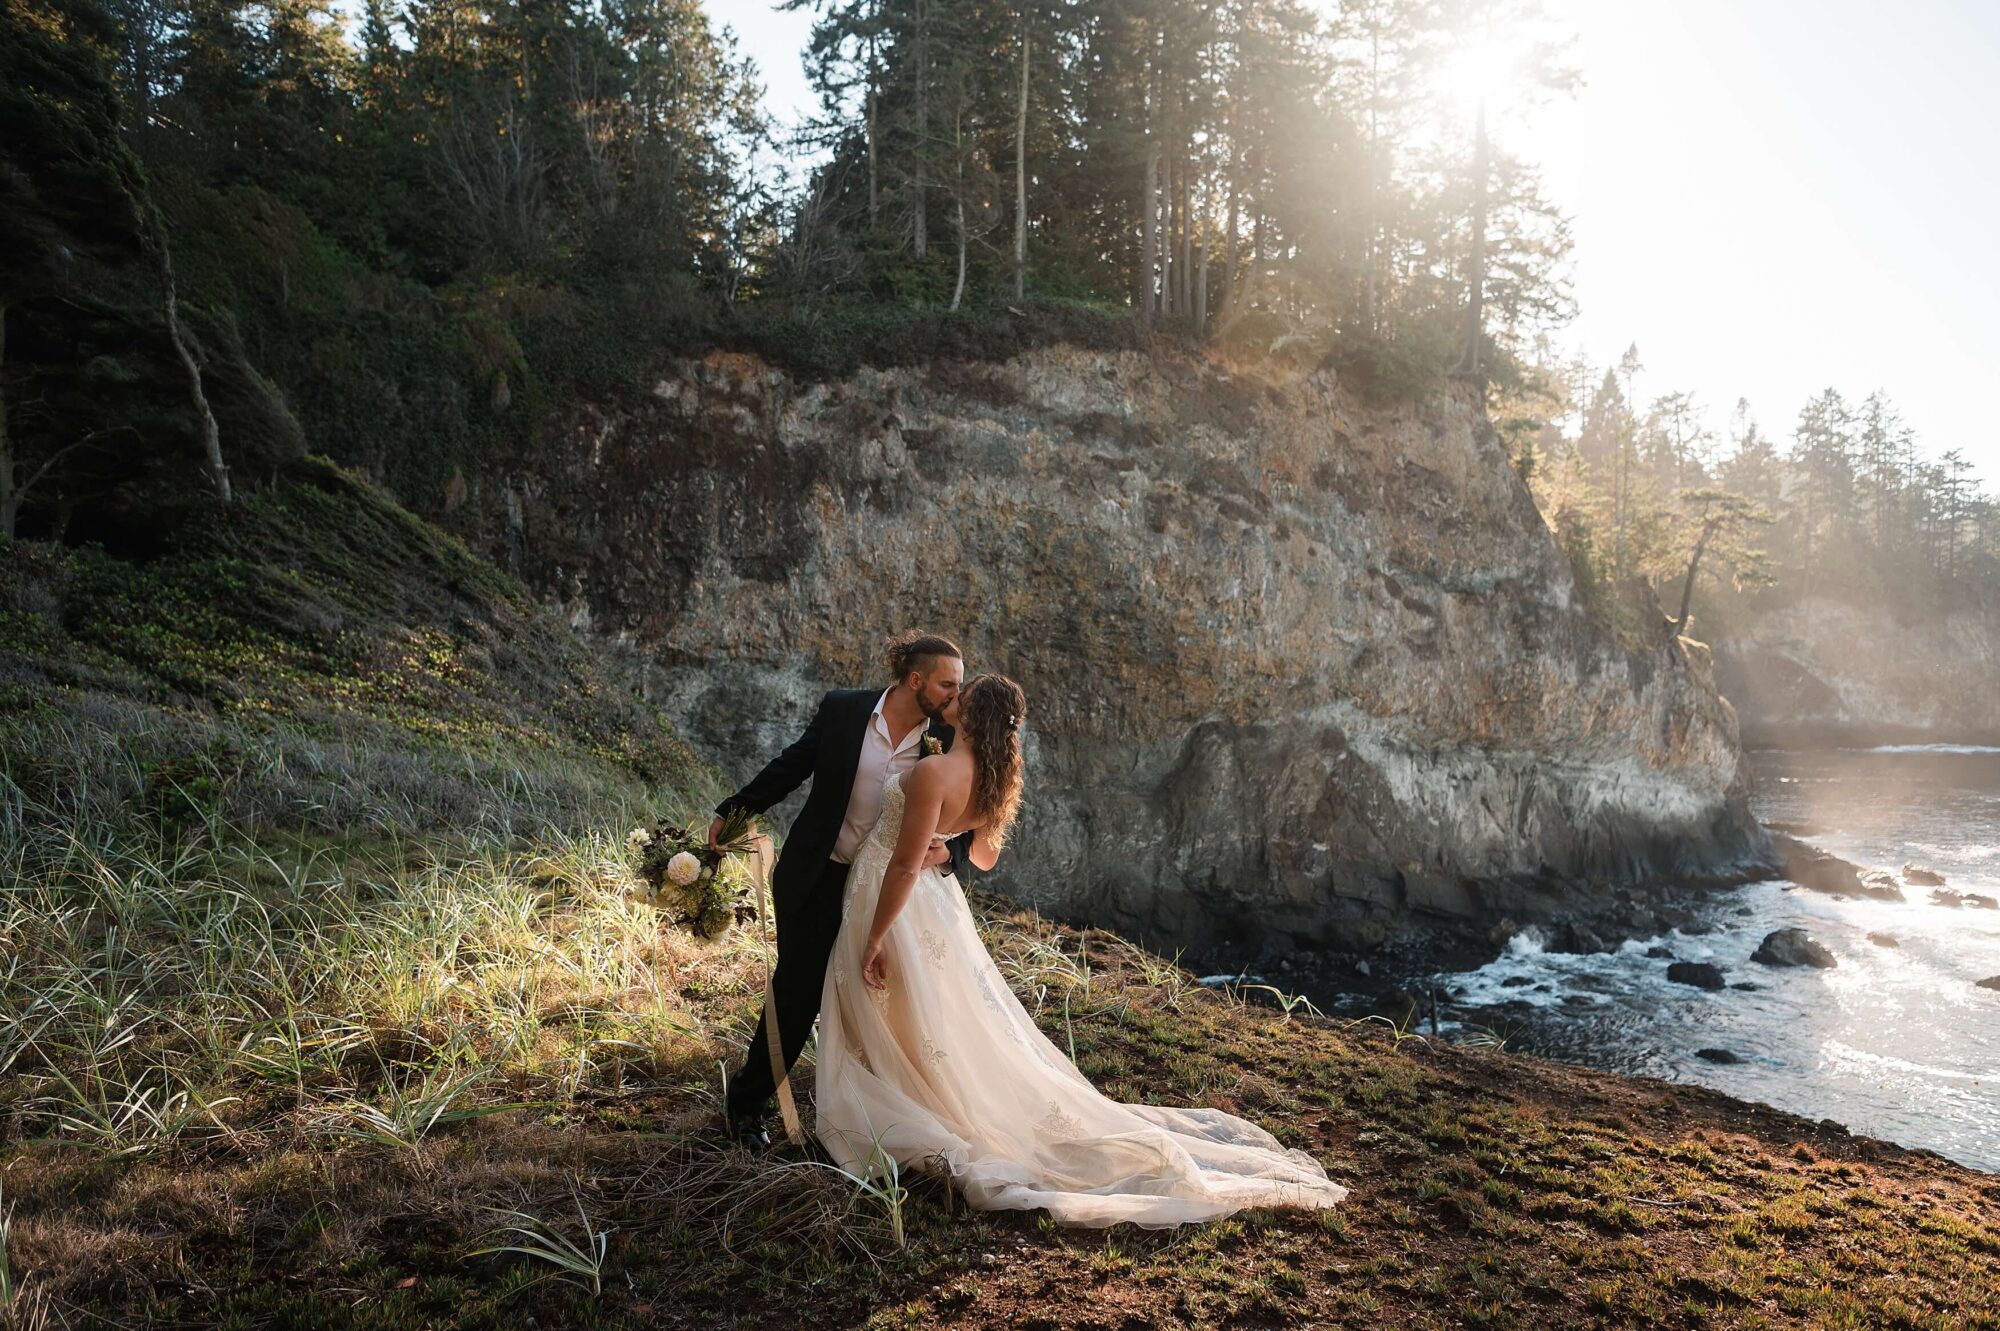 Bride and Groom eloping on the Washington state coast